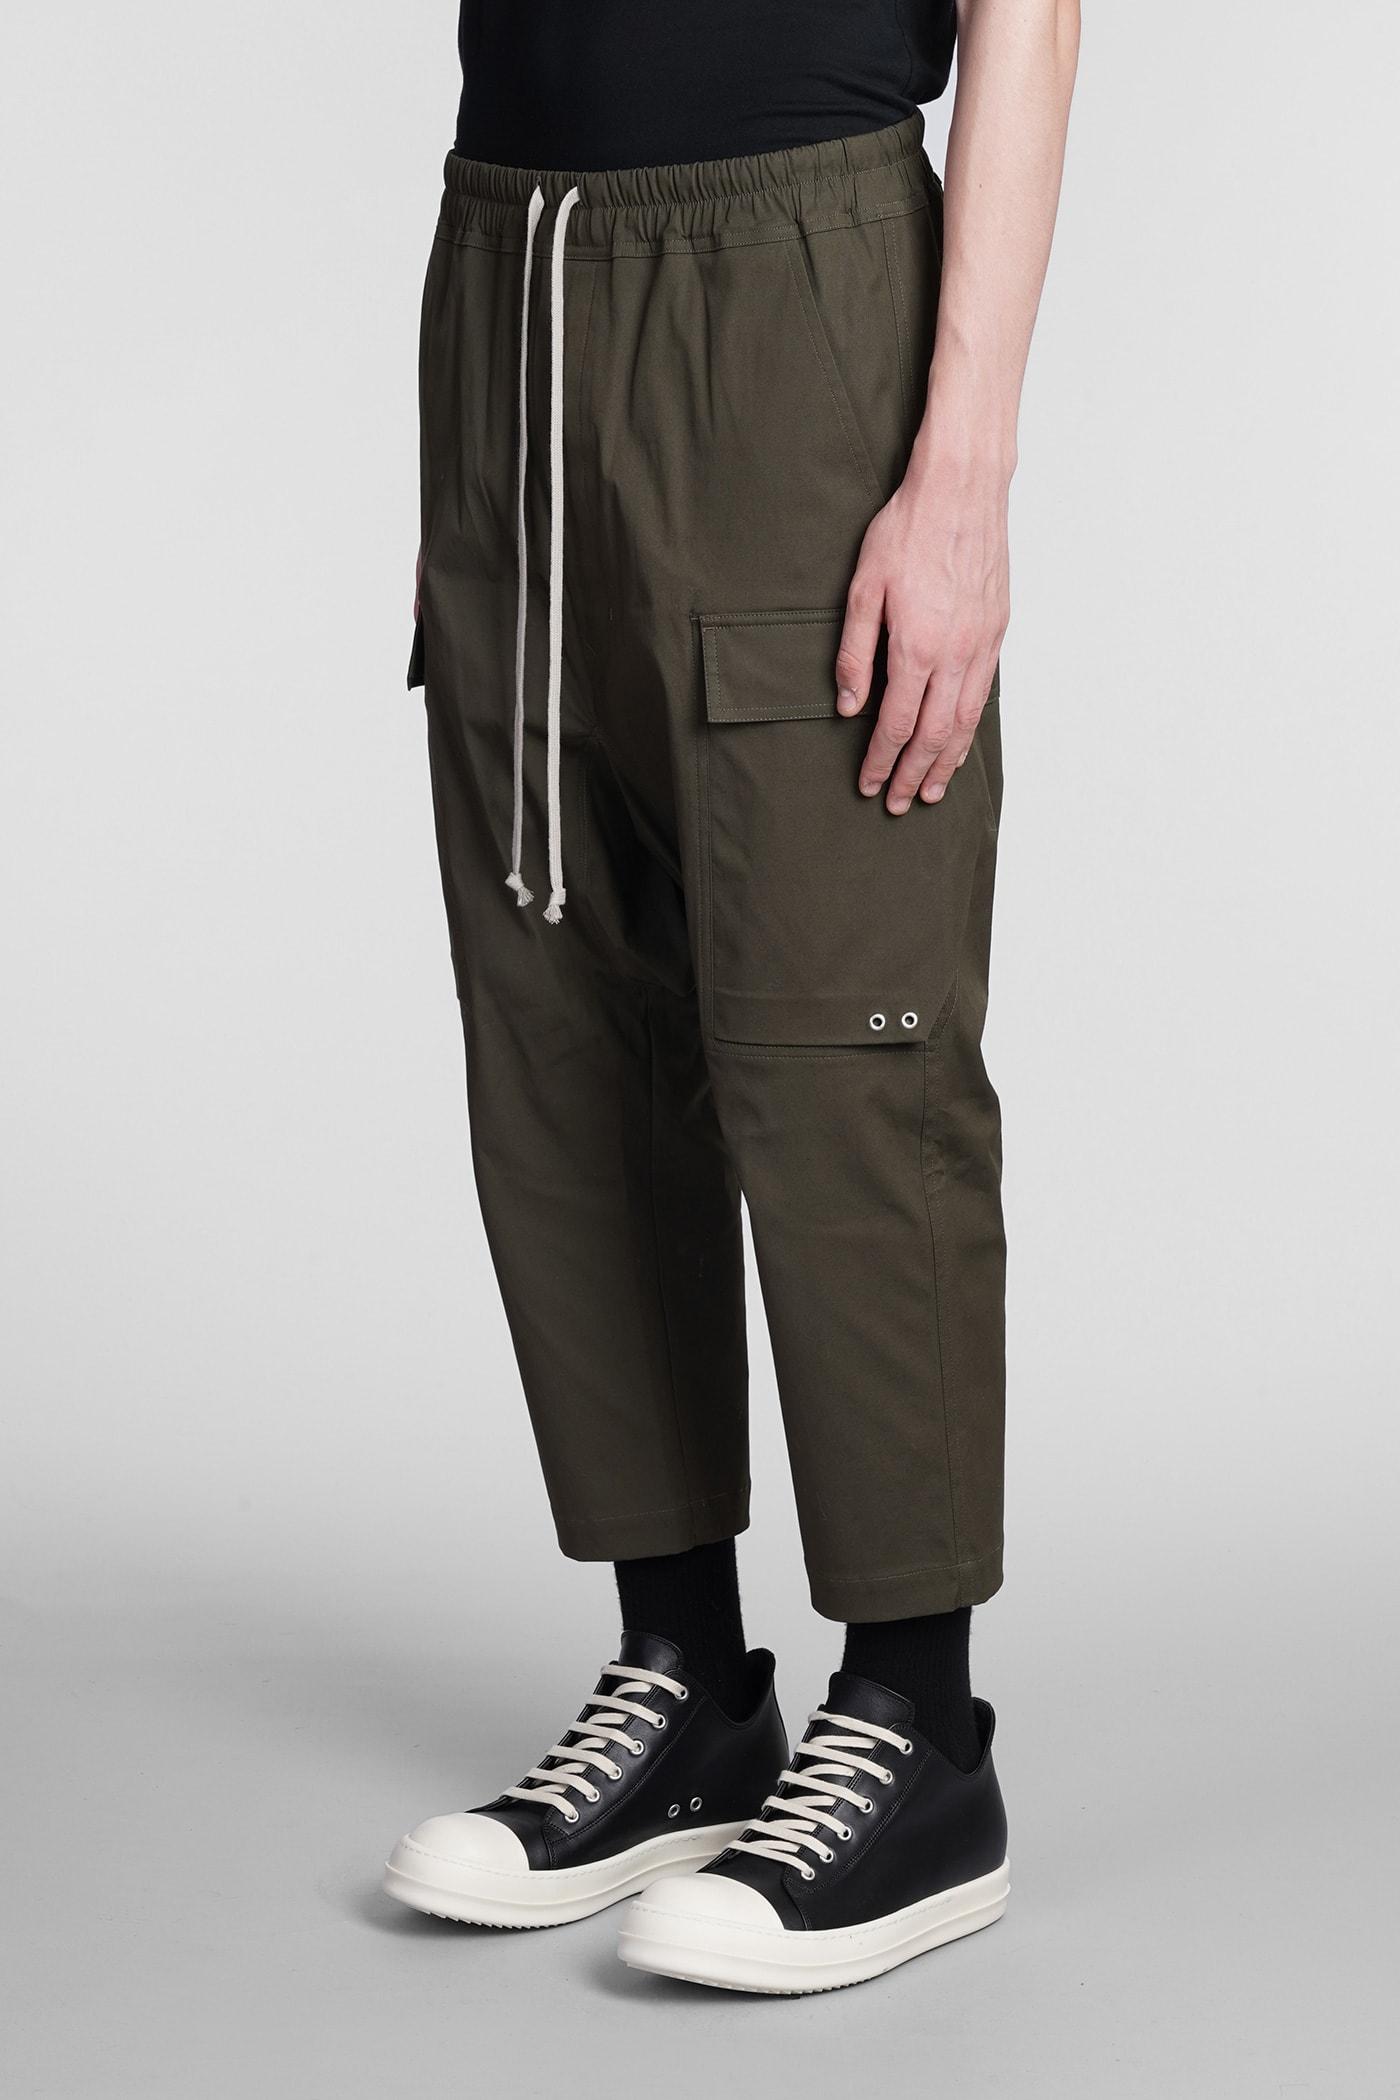 Rick Owens Cargo Cropped Pants In Green Cotton for Men | Lyst